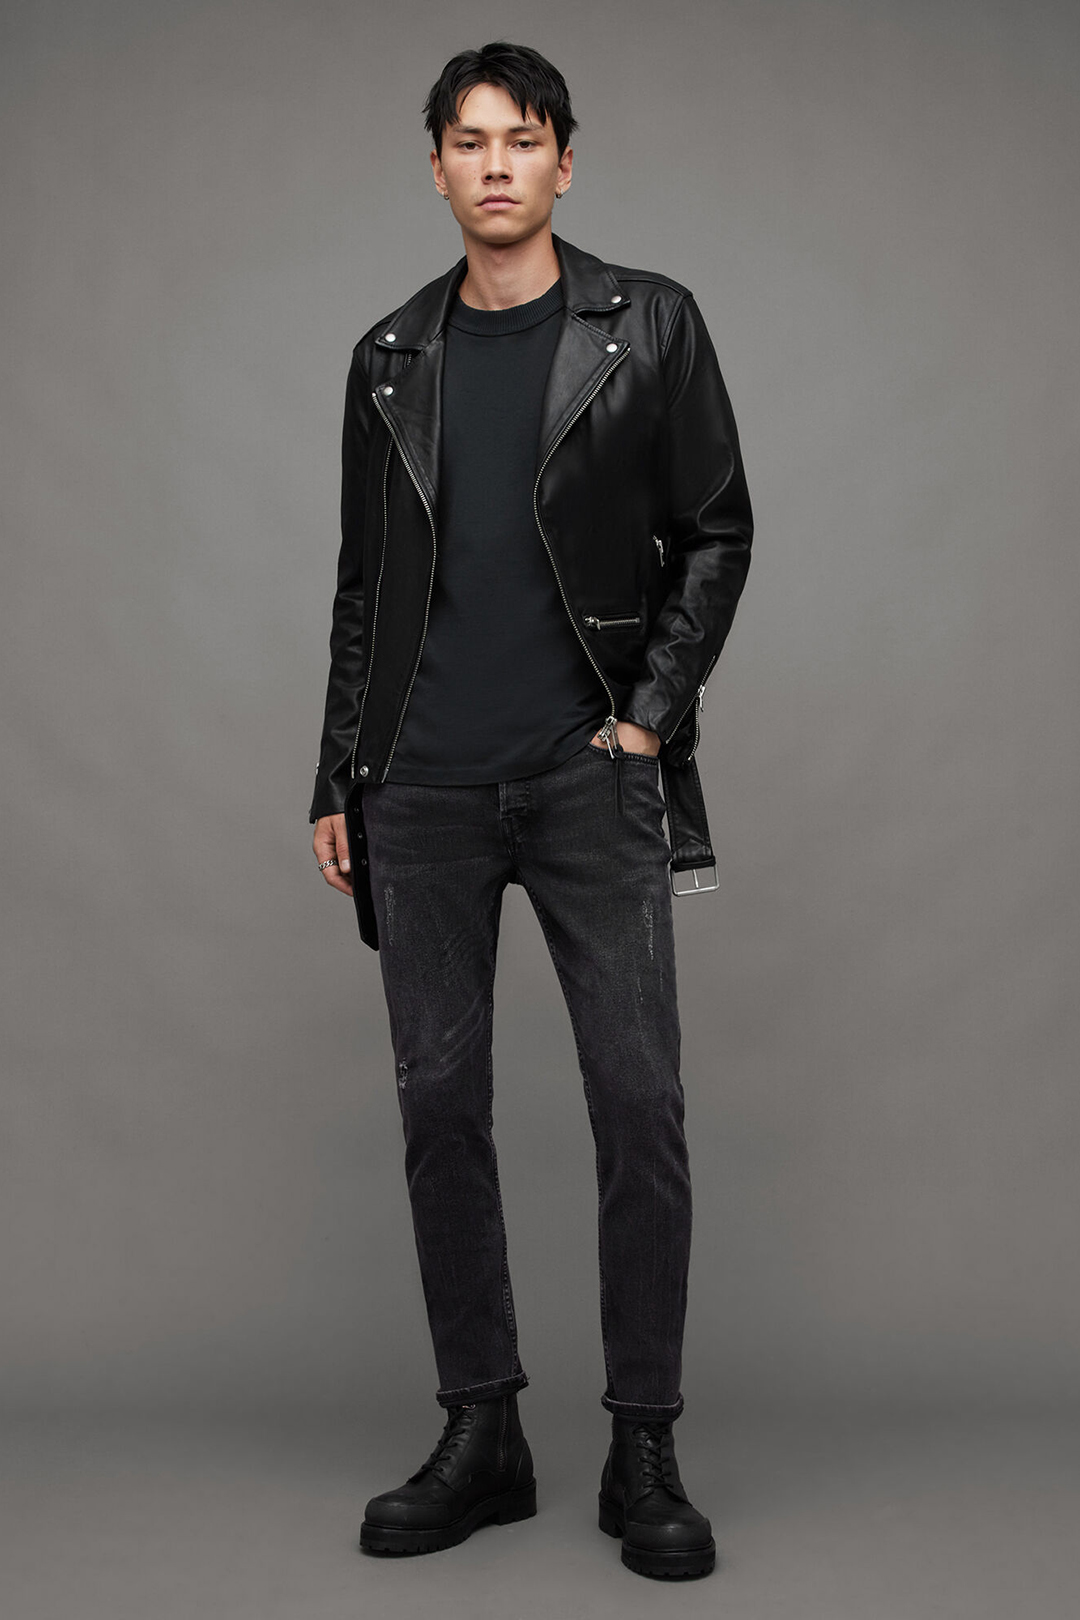 Black leather jacket, dark gray t-shirt, charcoal gray jeans, and black boots outfit